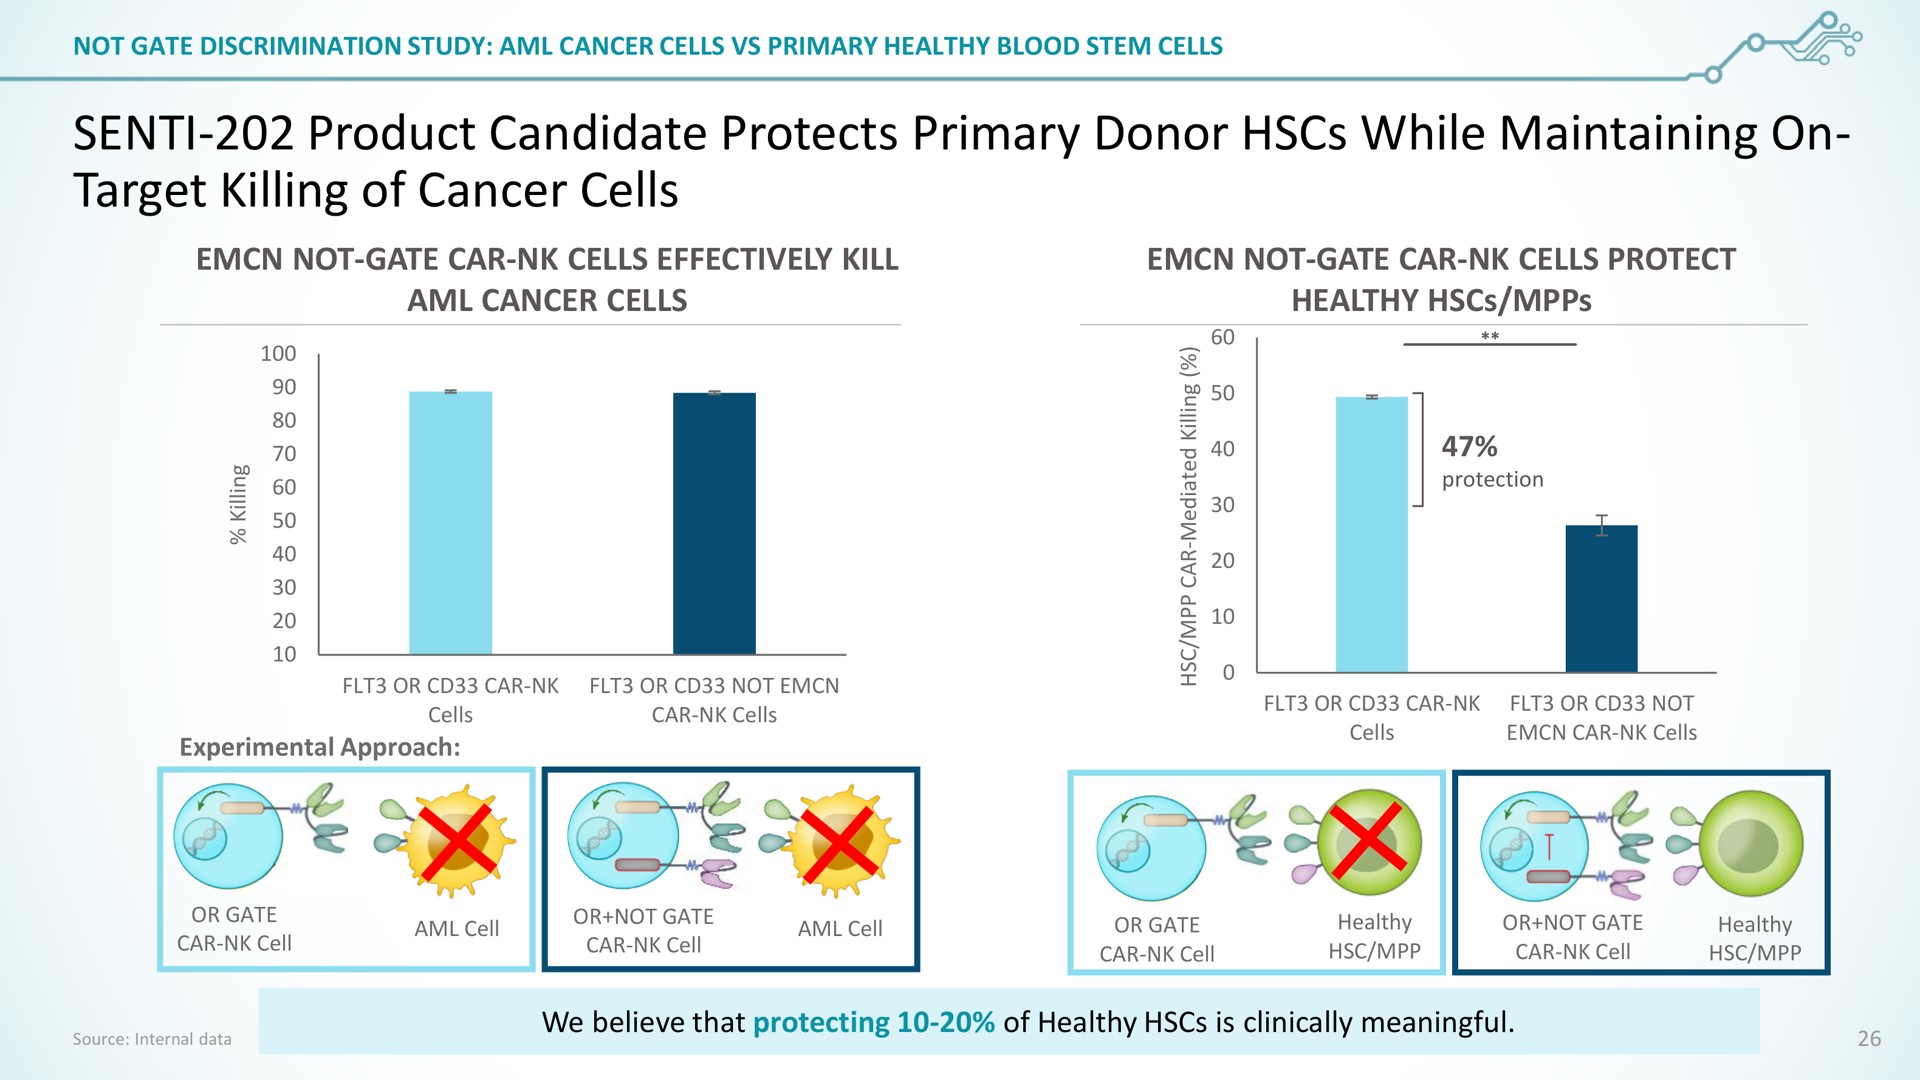 senti product candidate protects primary donor while maintaining on target killing of cancer cells eye | SentiBio